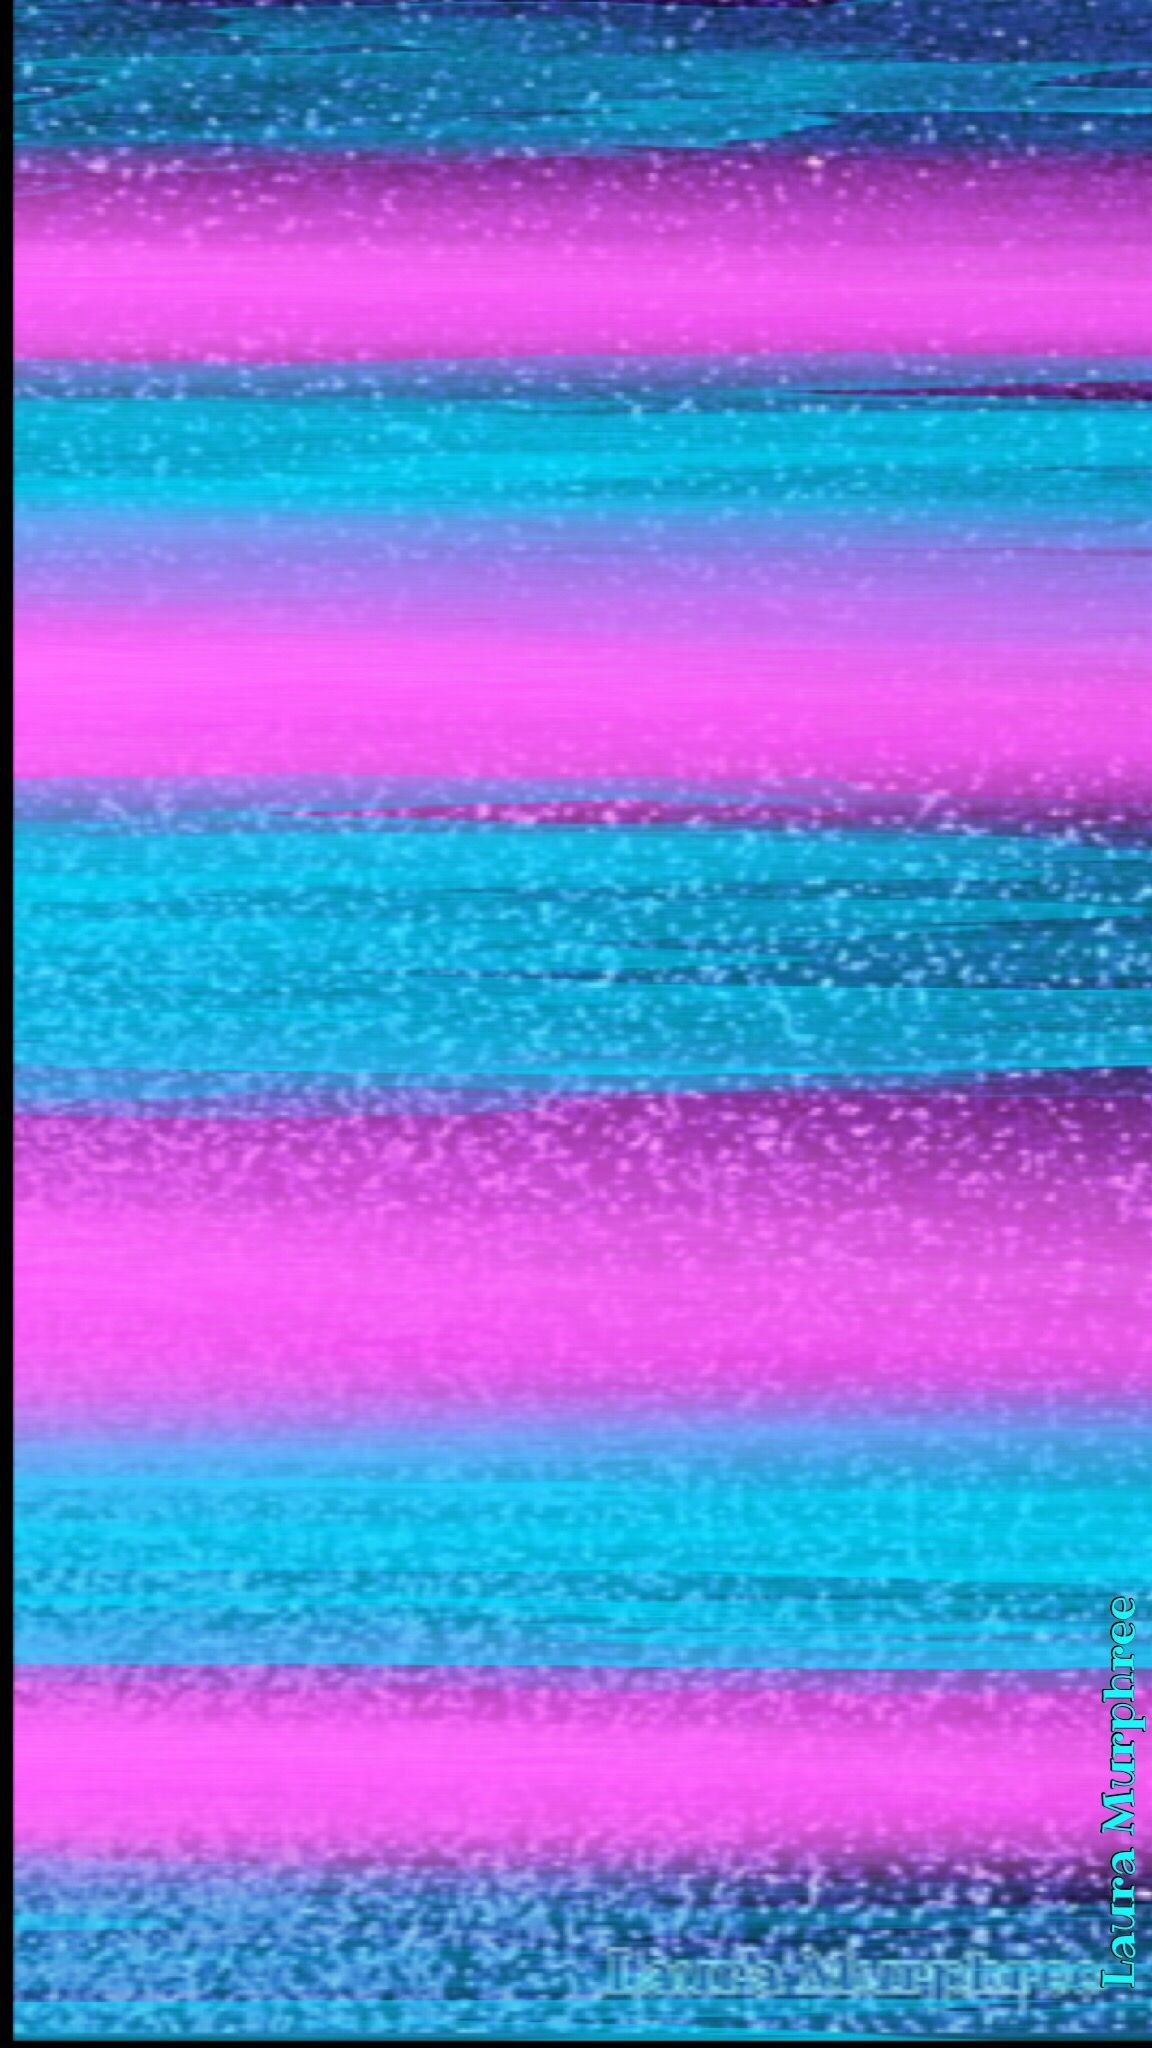 Pink And Blue Glitter Wallpapers